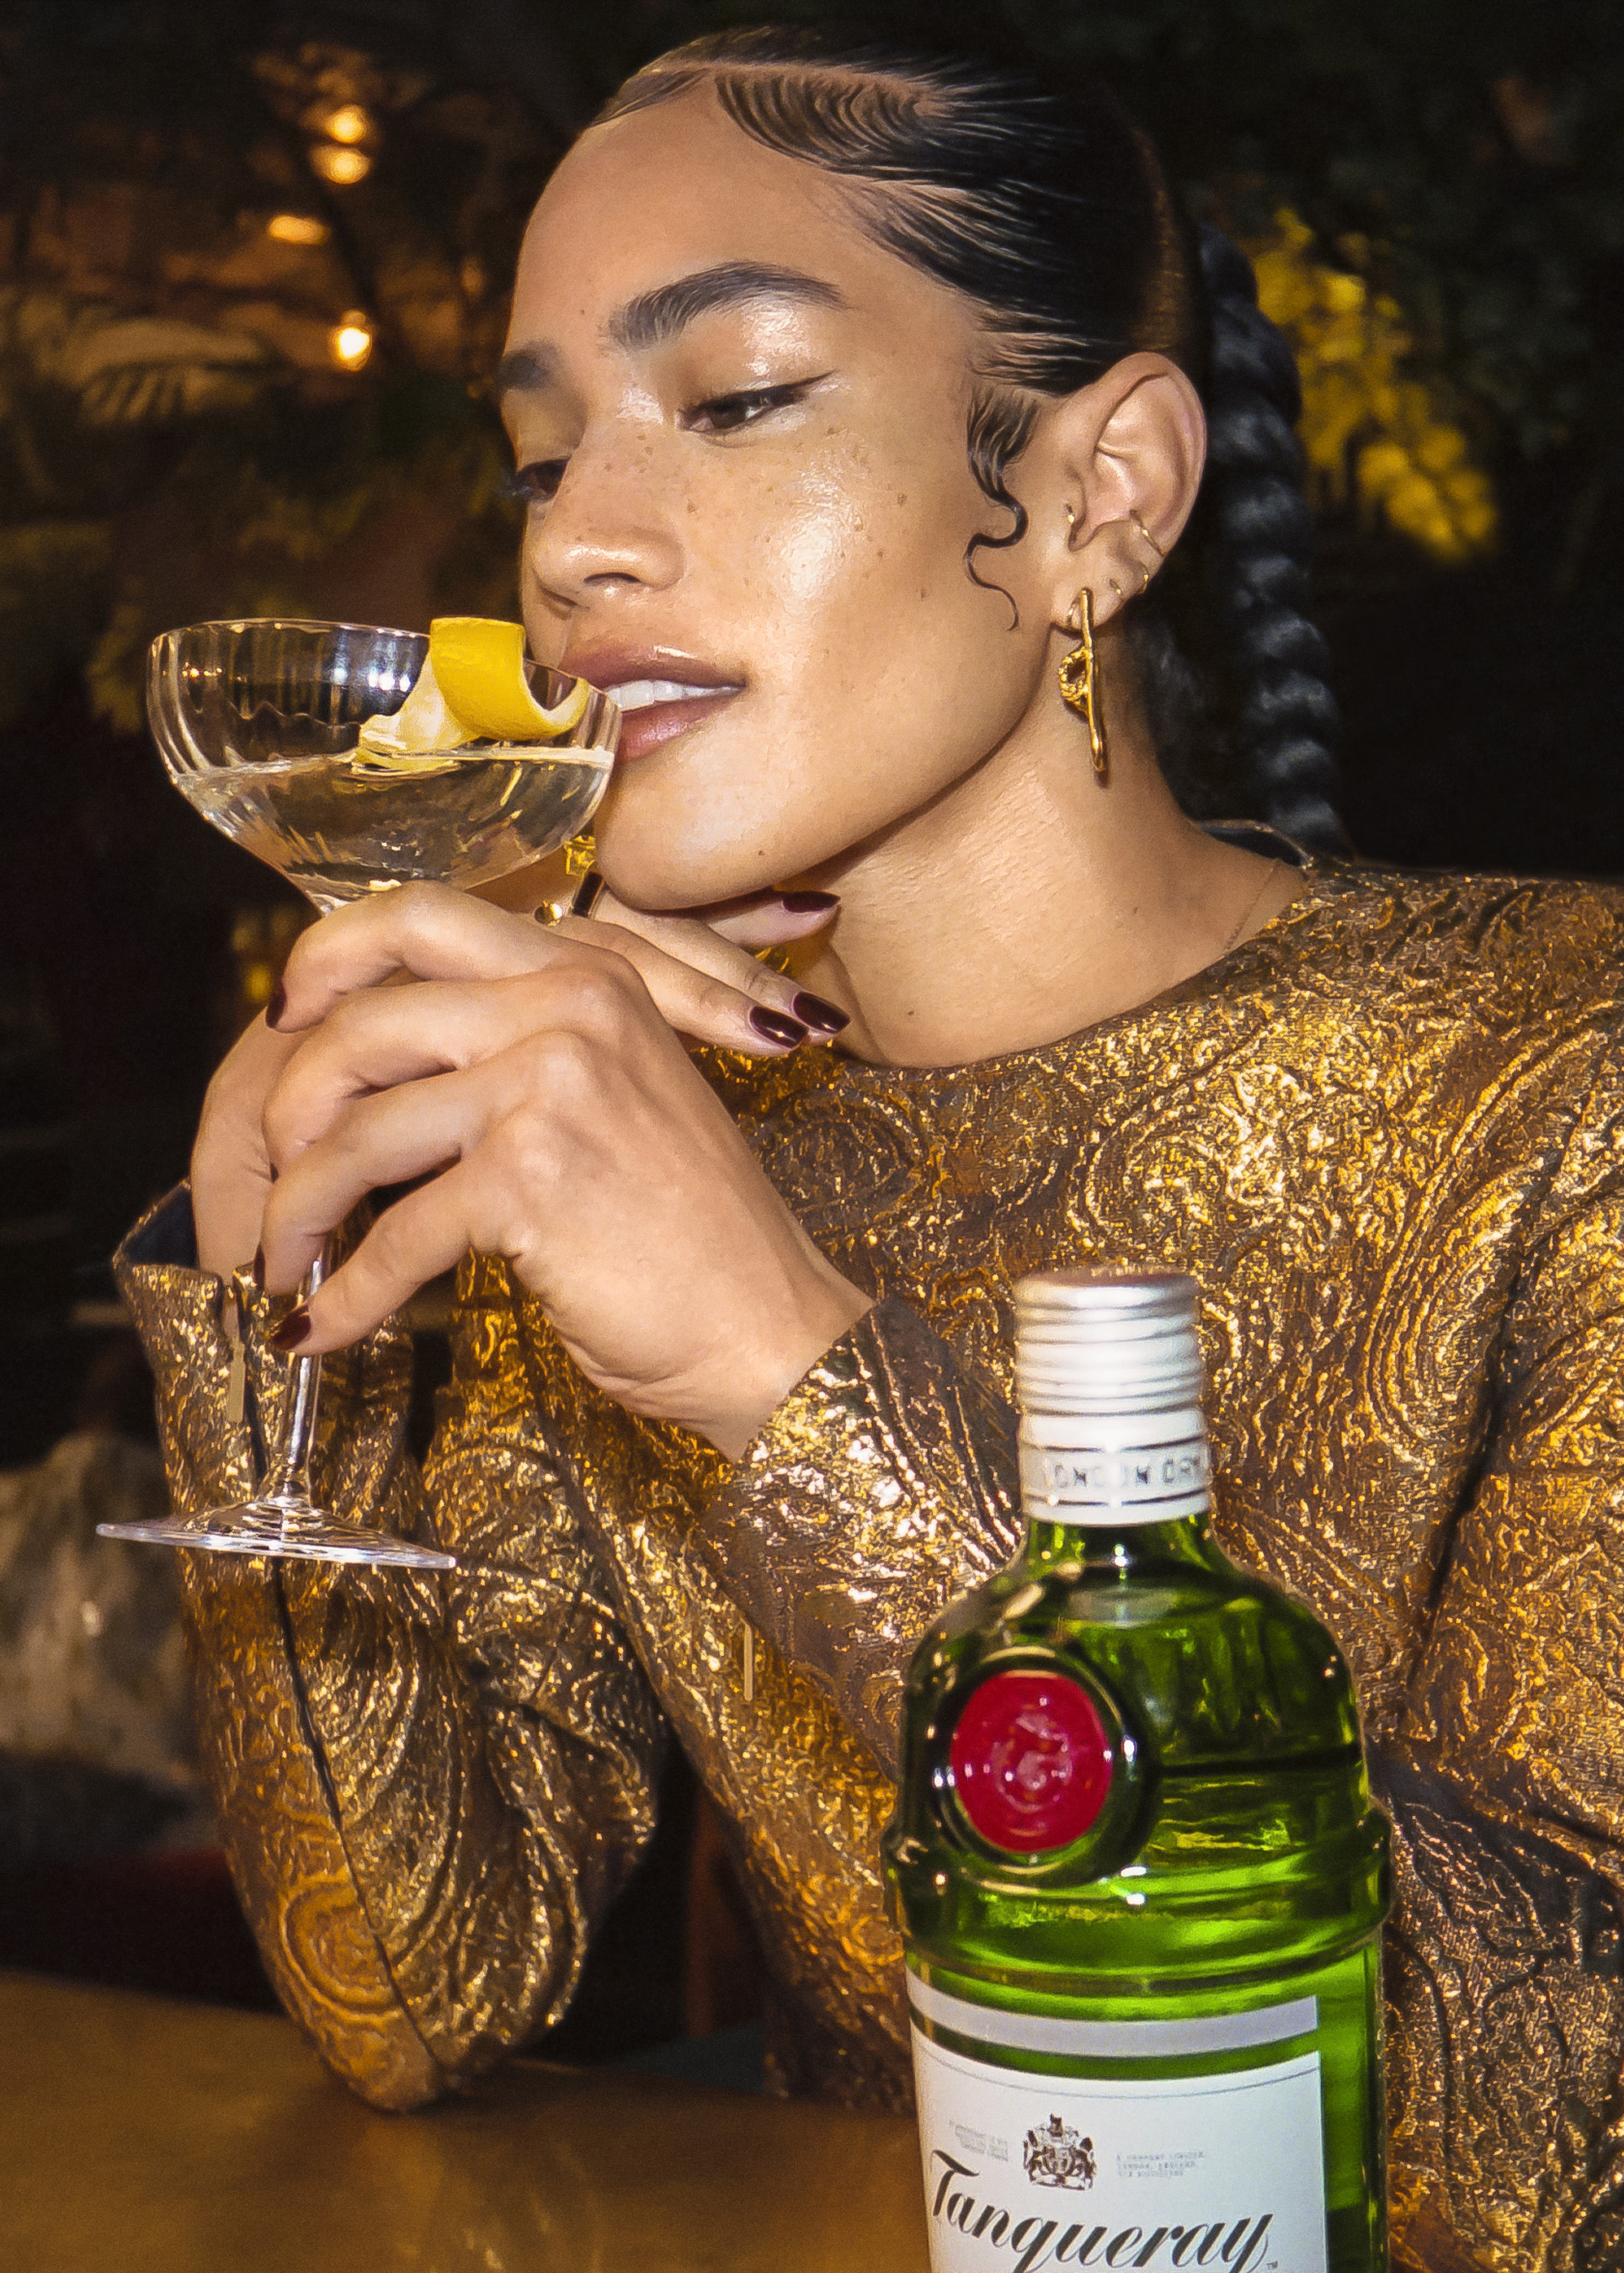 METTE Narrative on her journey to find the perfect Tanqueray martini in Ridley Scott Agency’s digital spot inspired by MGM's House of Gucci film.